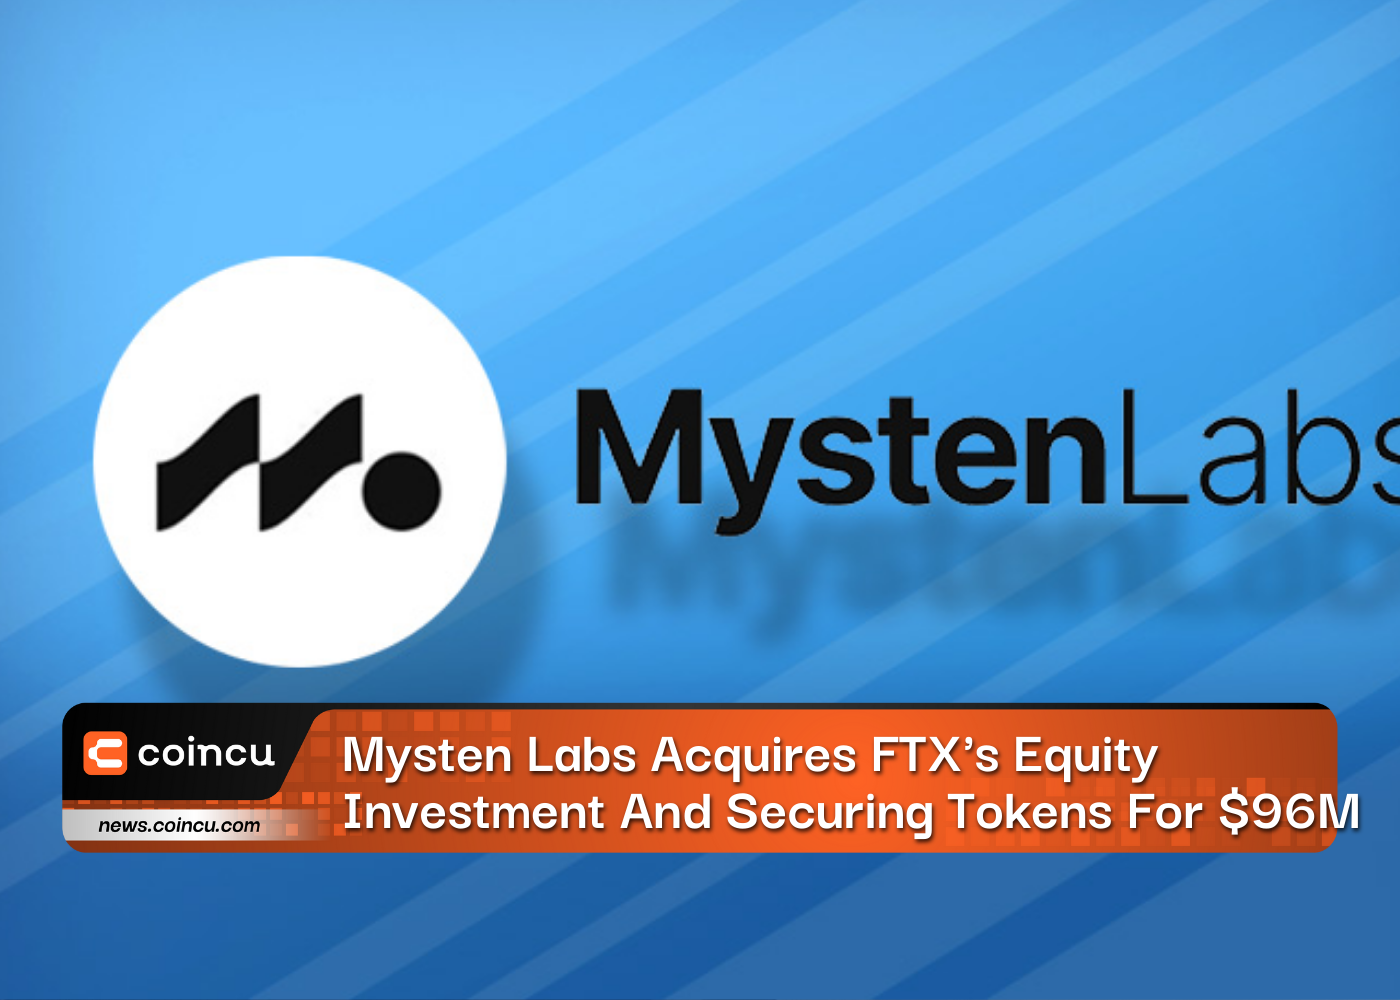 Mysten Labs Acquires FTX's Equity Investment And Securing Tokens For $96M